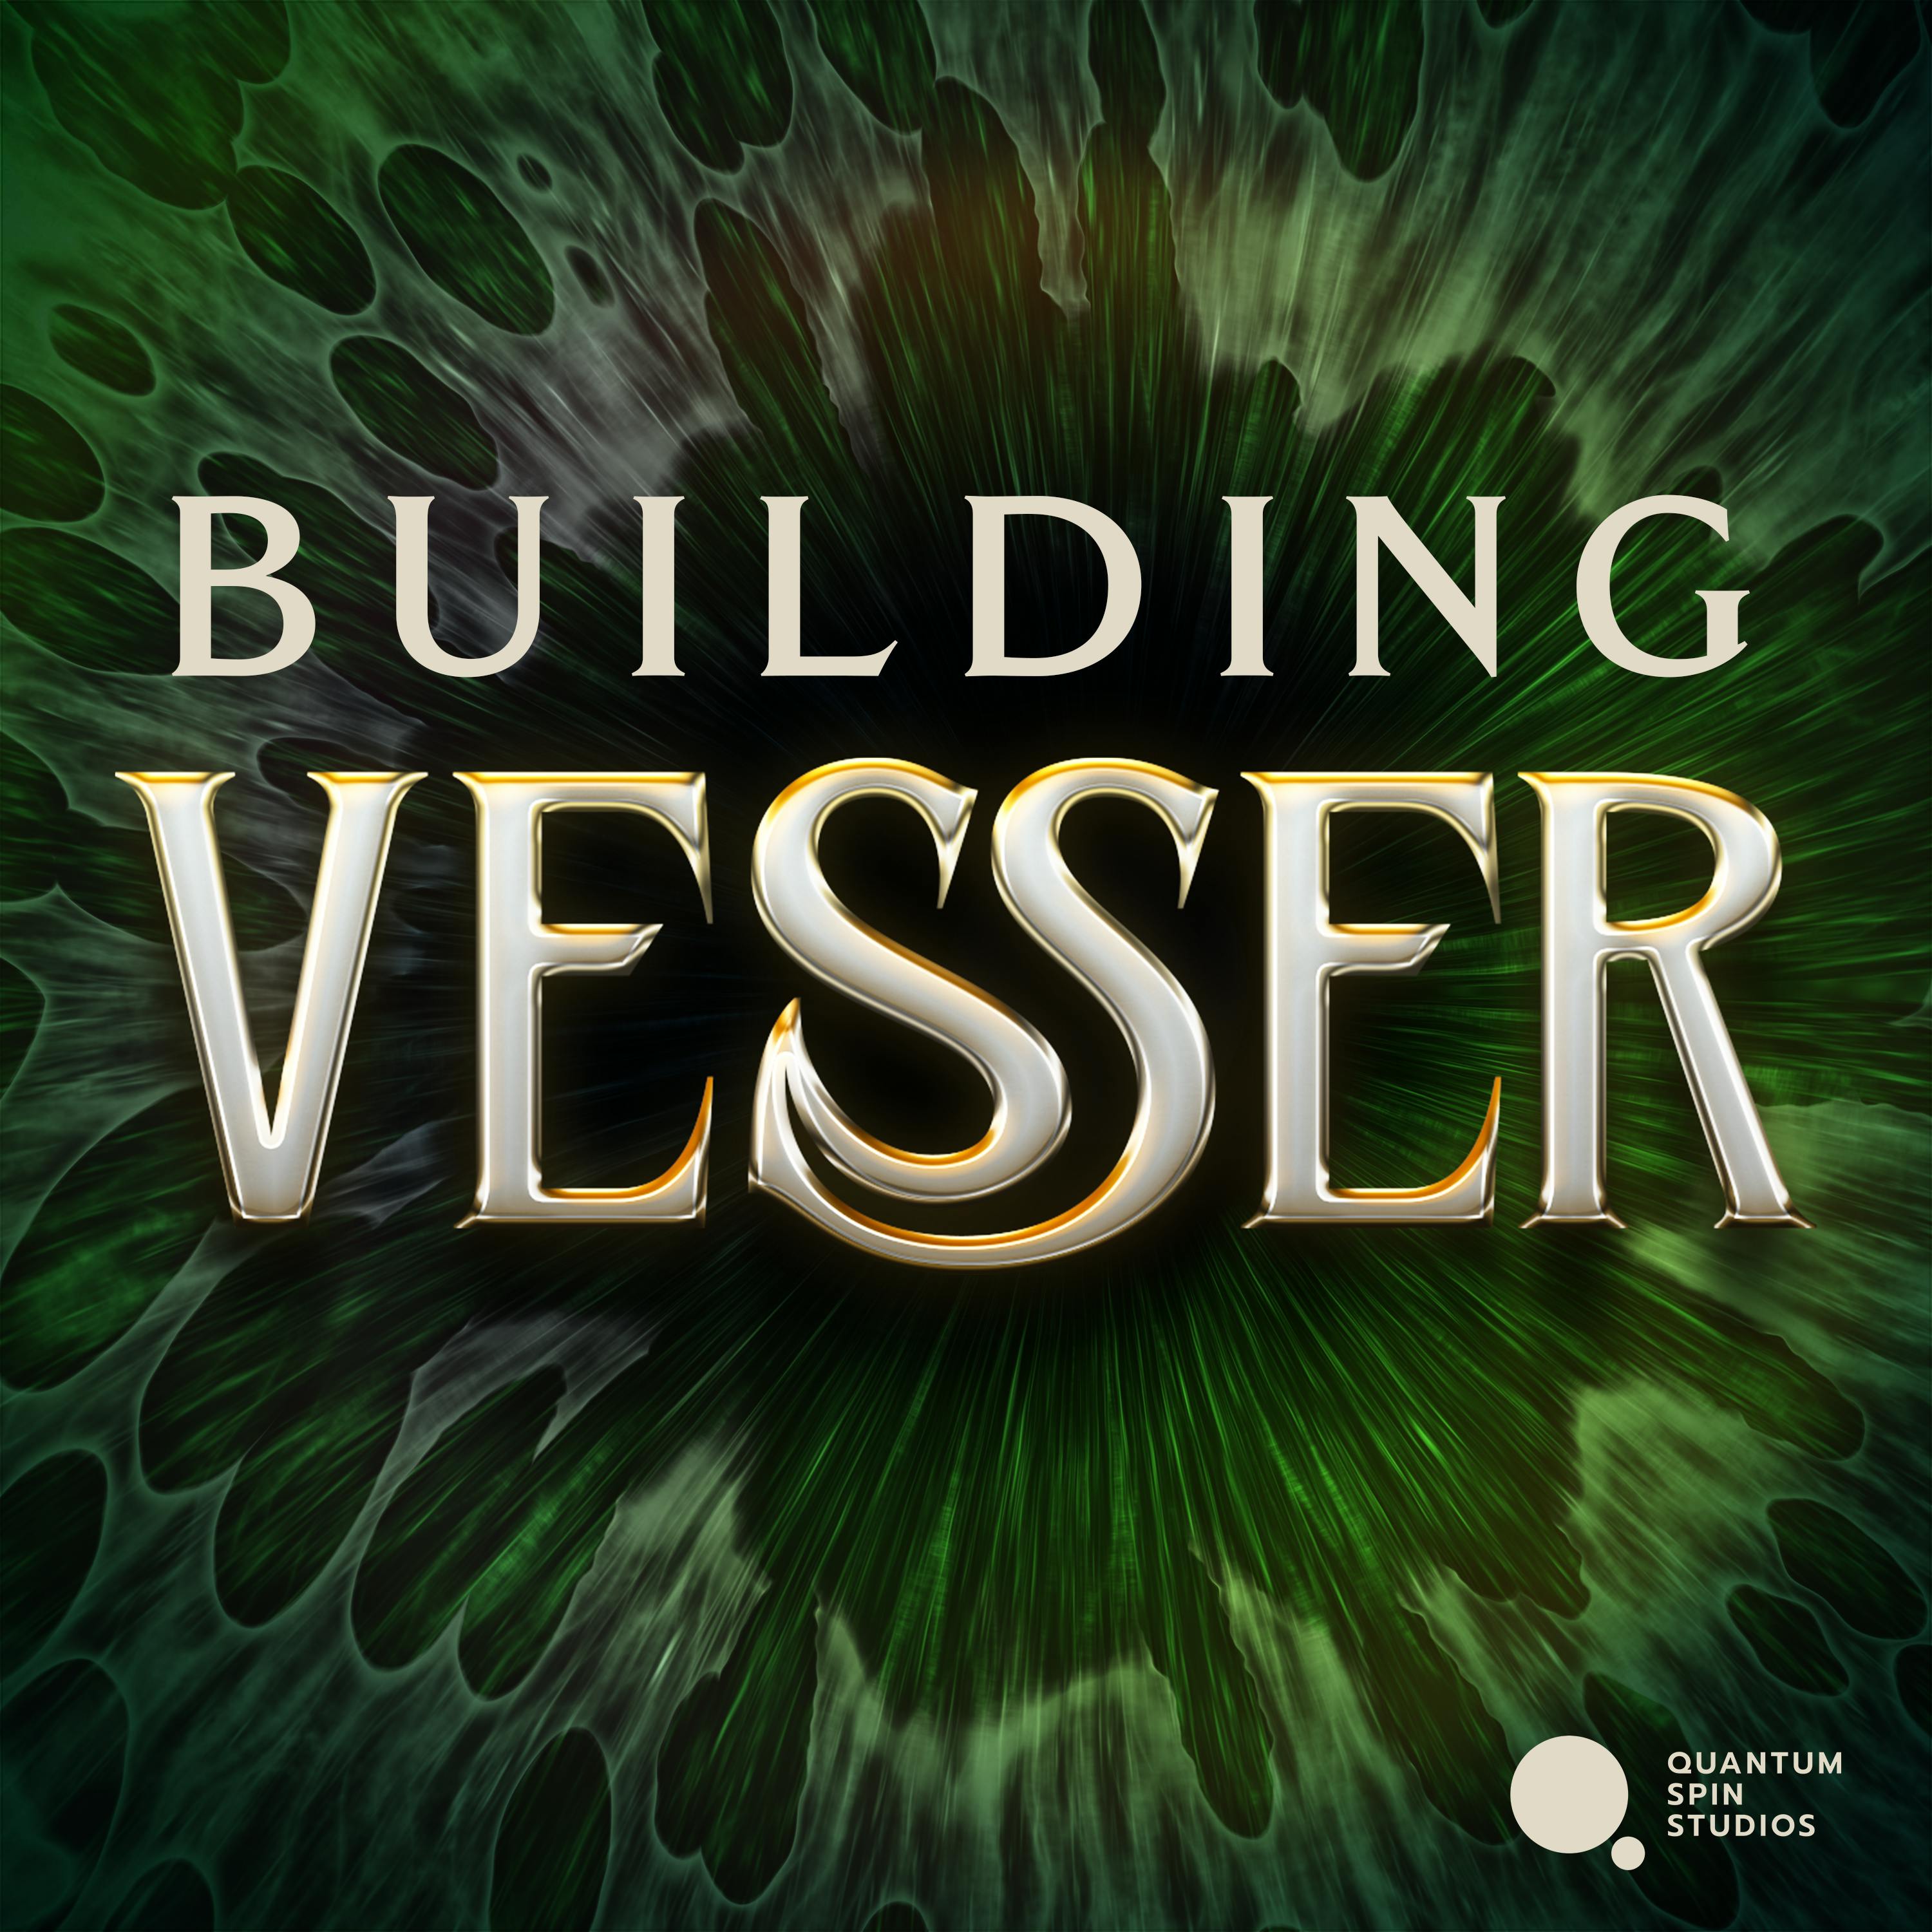 Building Vesser: The Other Kind of Magic